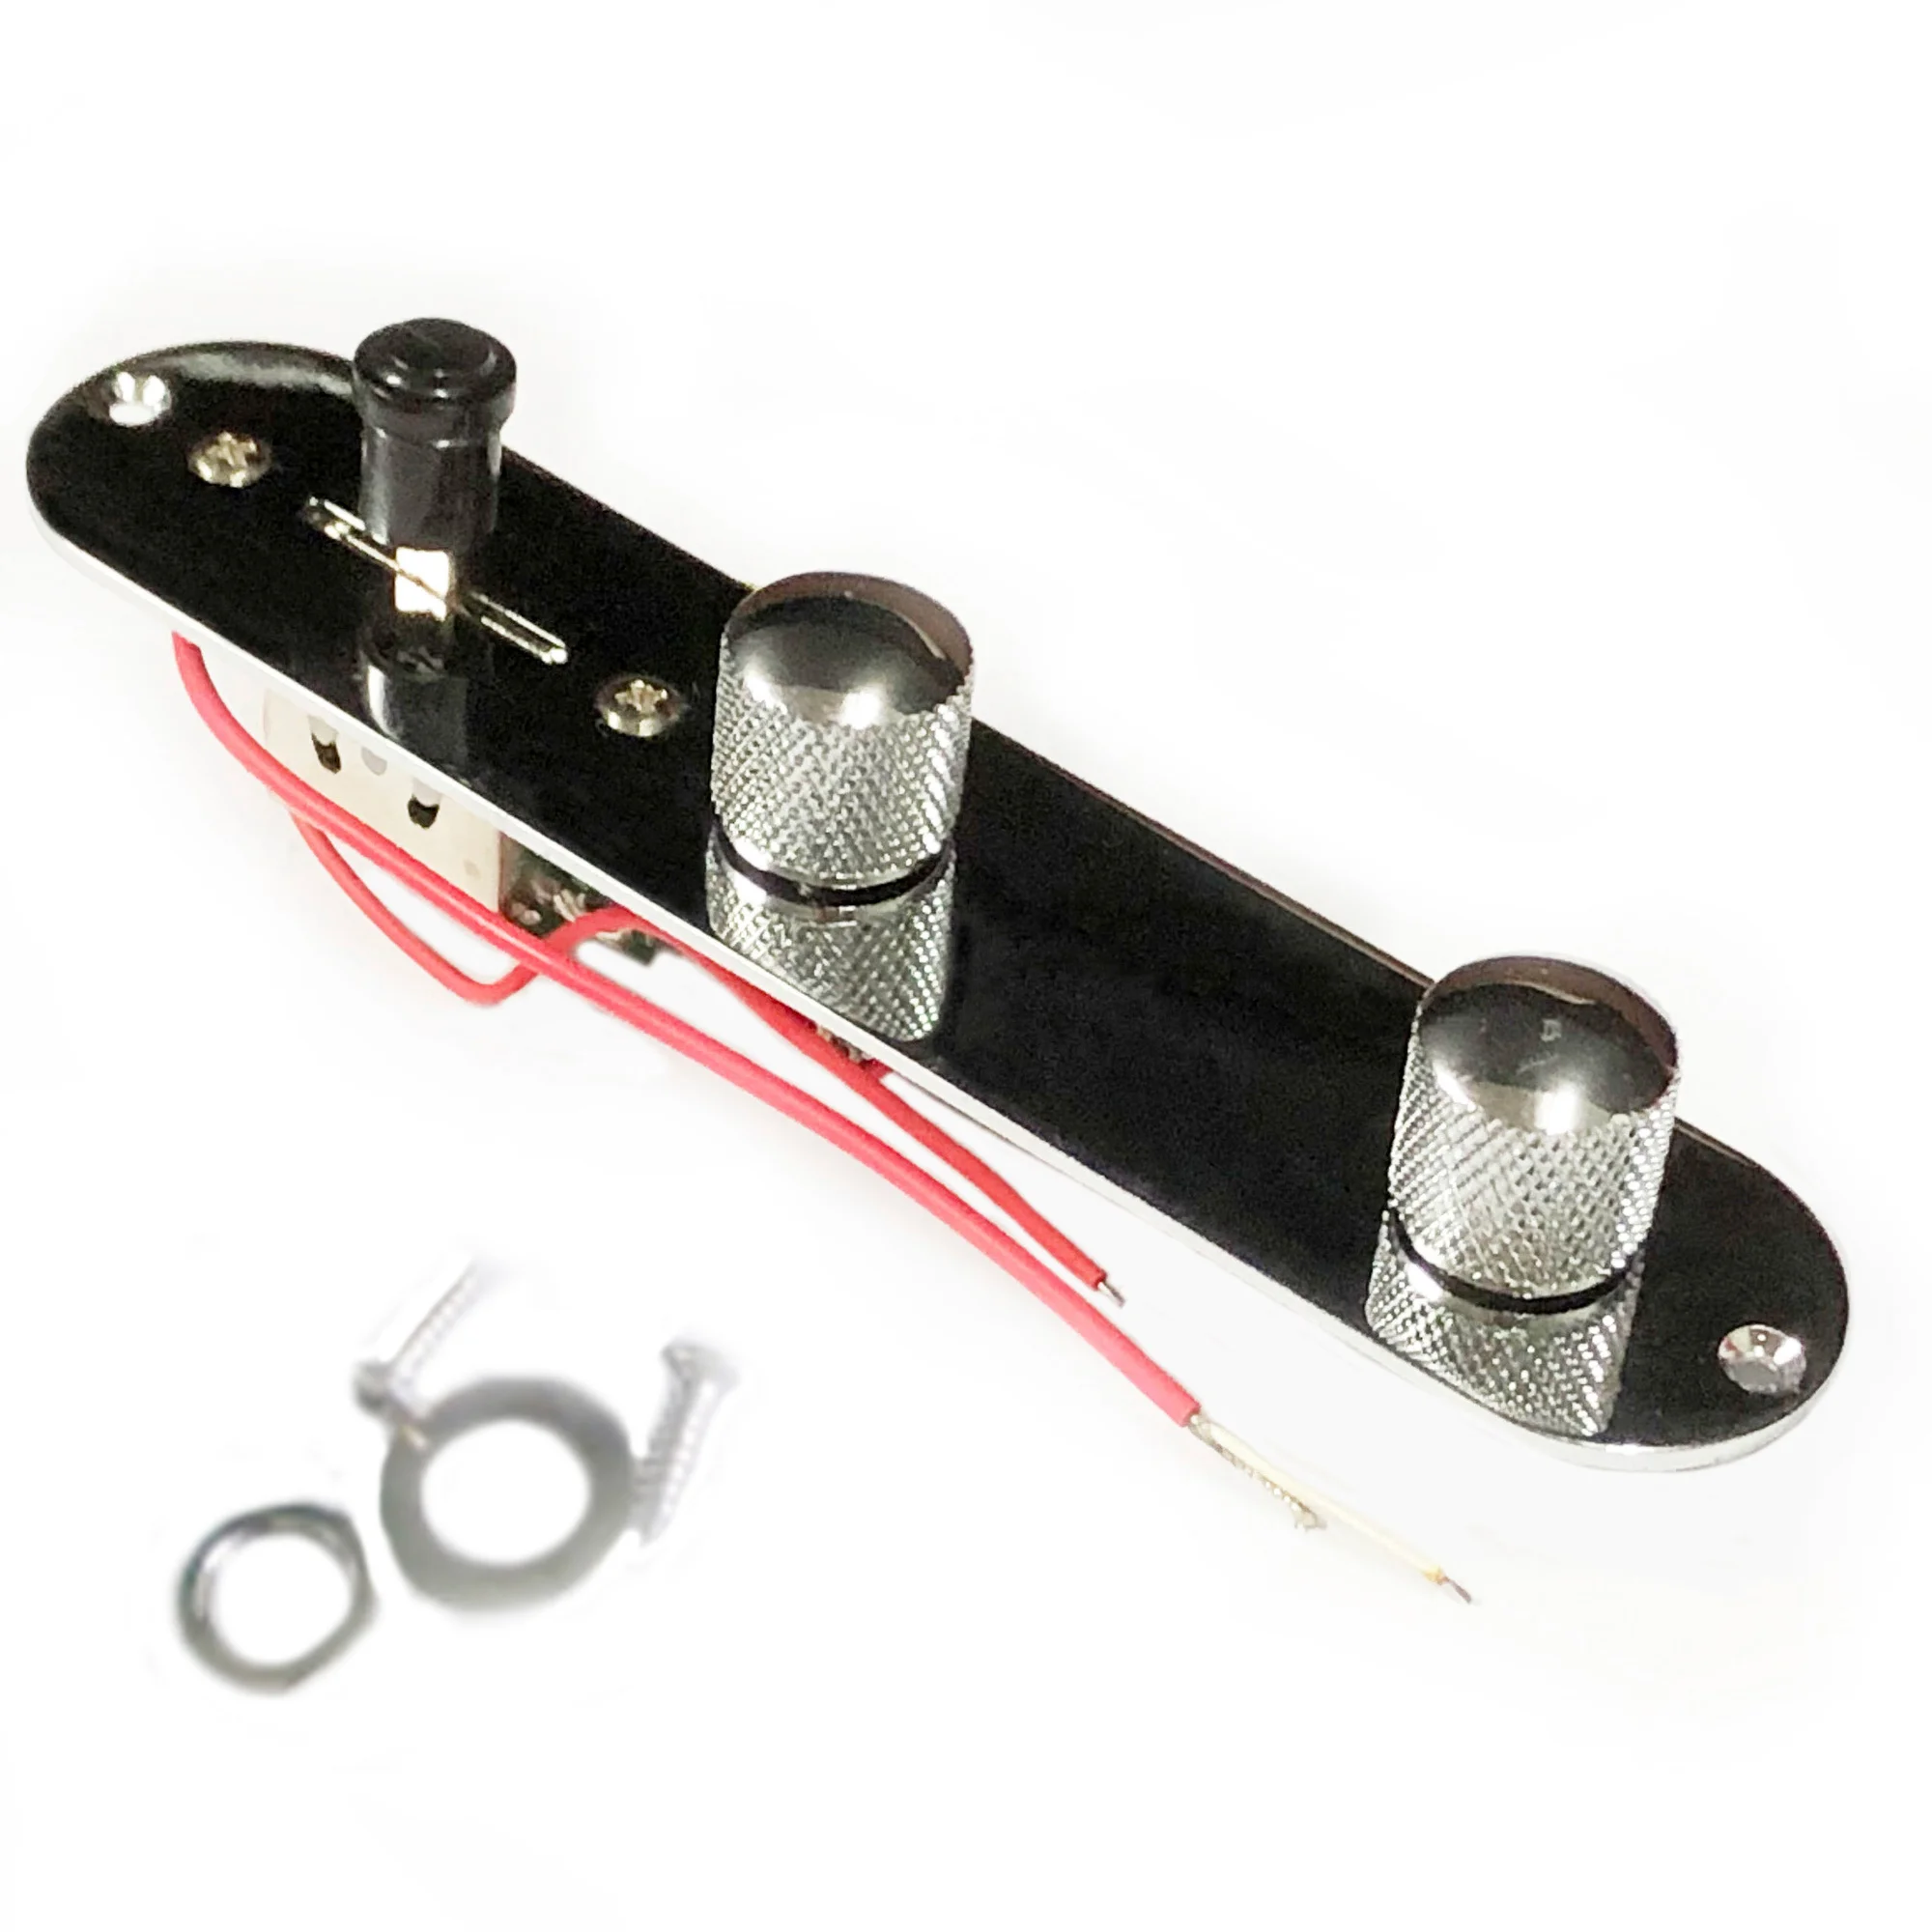 Hot Free Shipping wired TL guitar control plate system chrome color guitar control plate assembly guitar parts